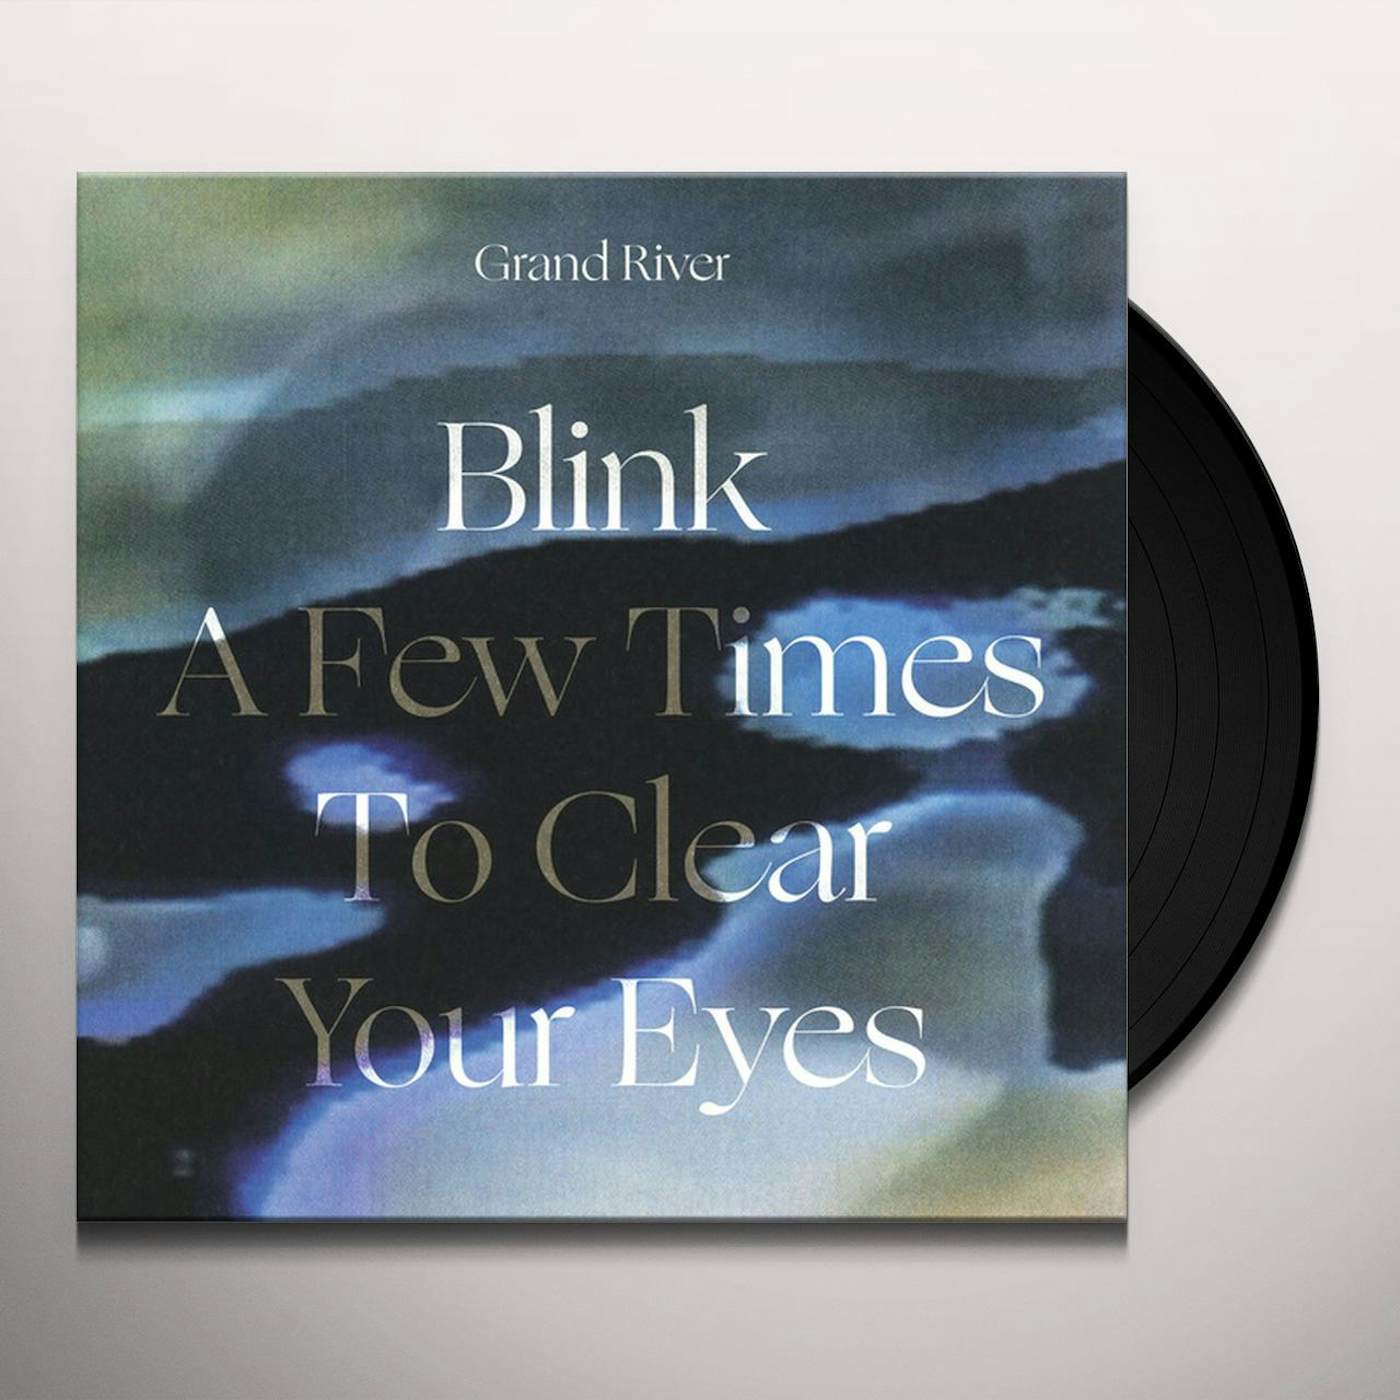 Grand River Blink a Few Times to Clear Your Eyes Vinyl Record